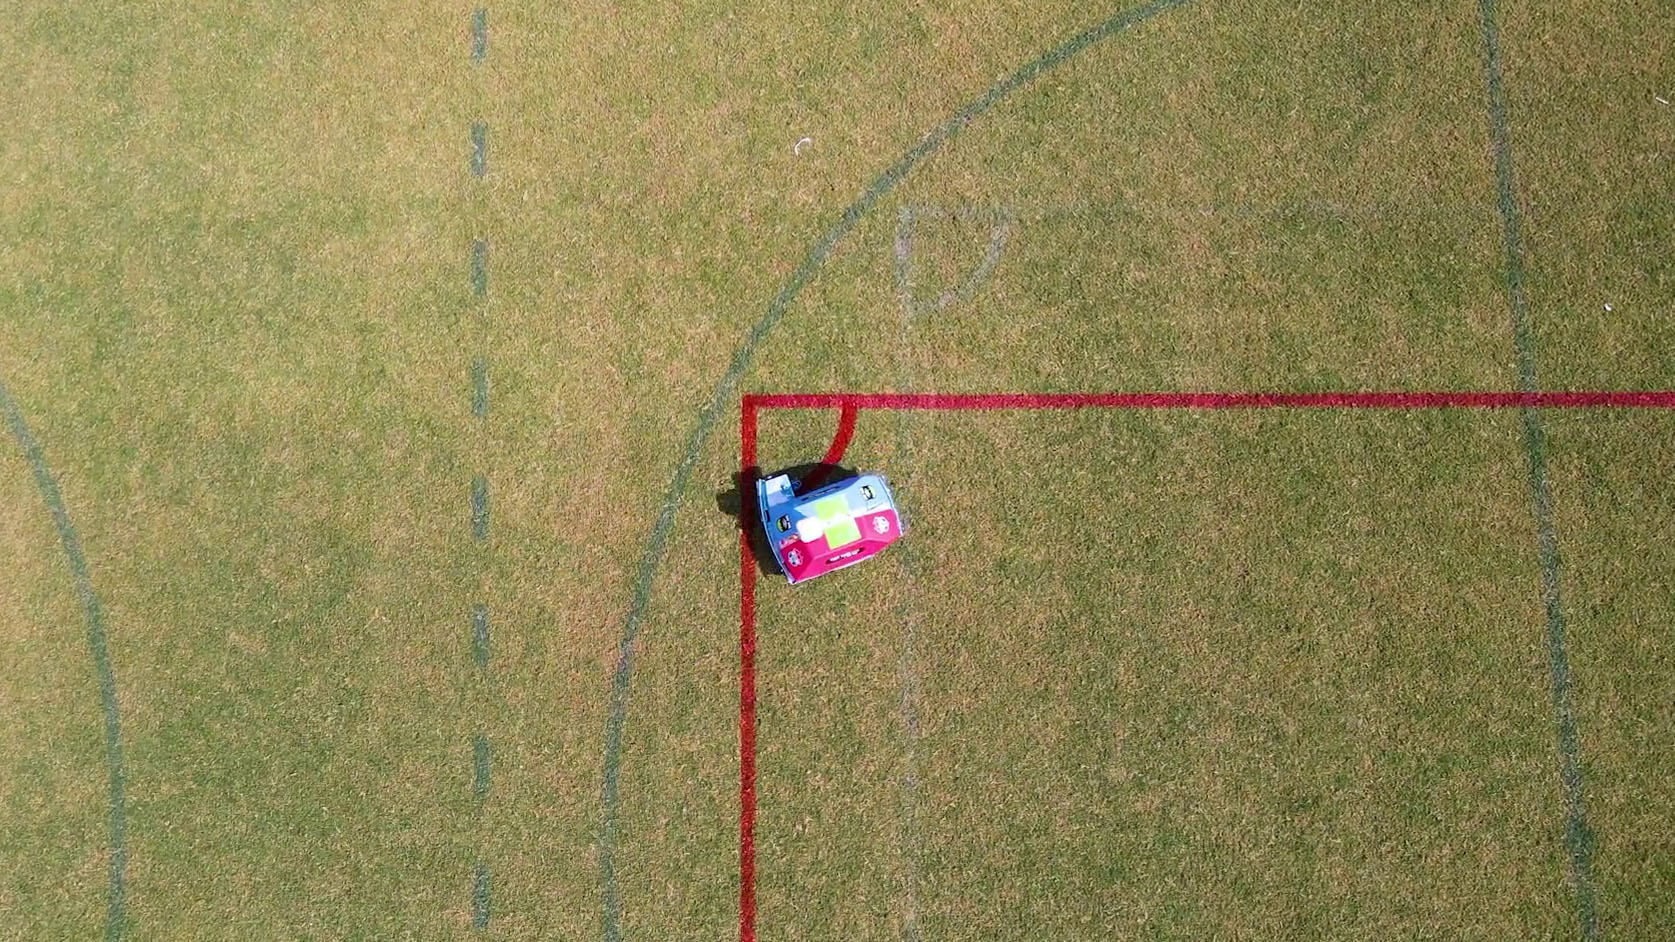 Custom wrapped line marking robot painting the corner arc on a soccer field